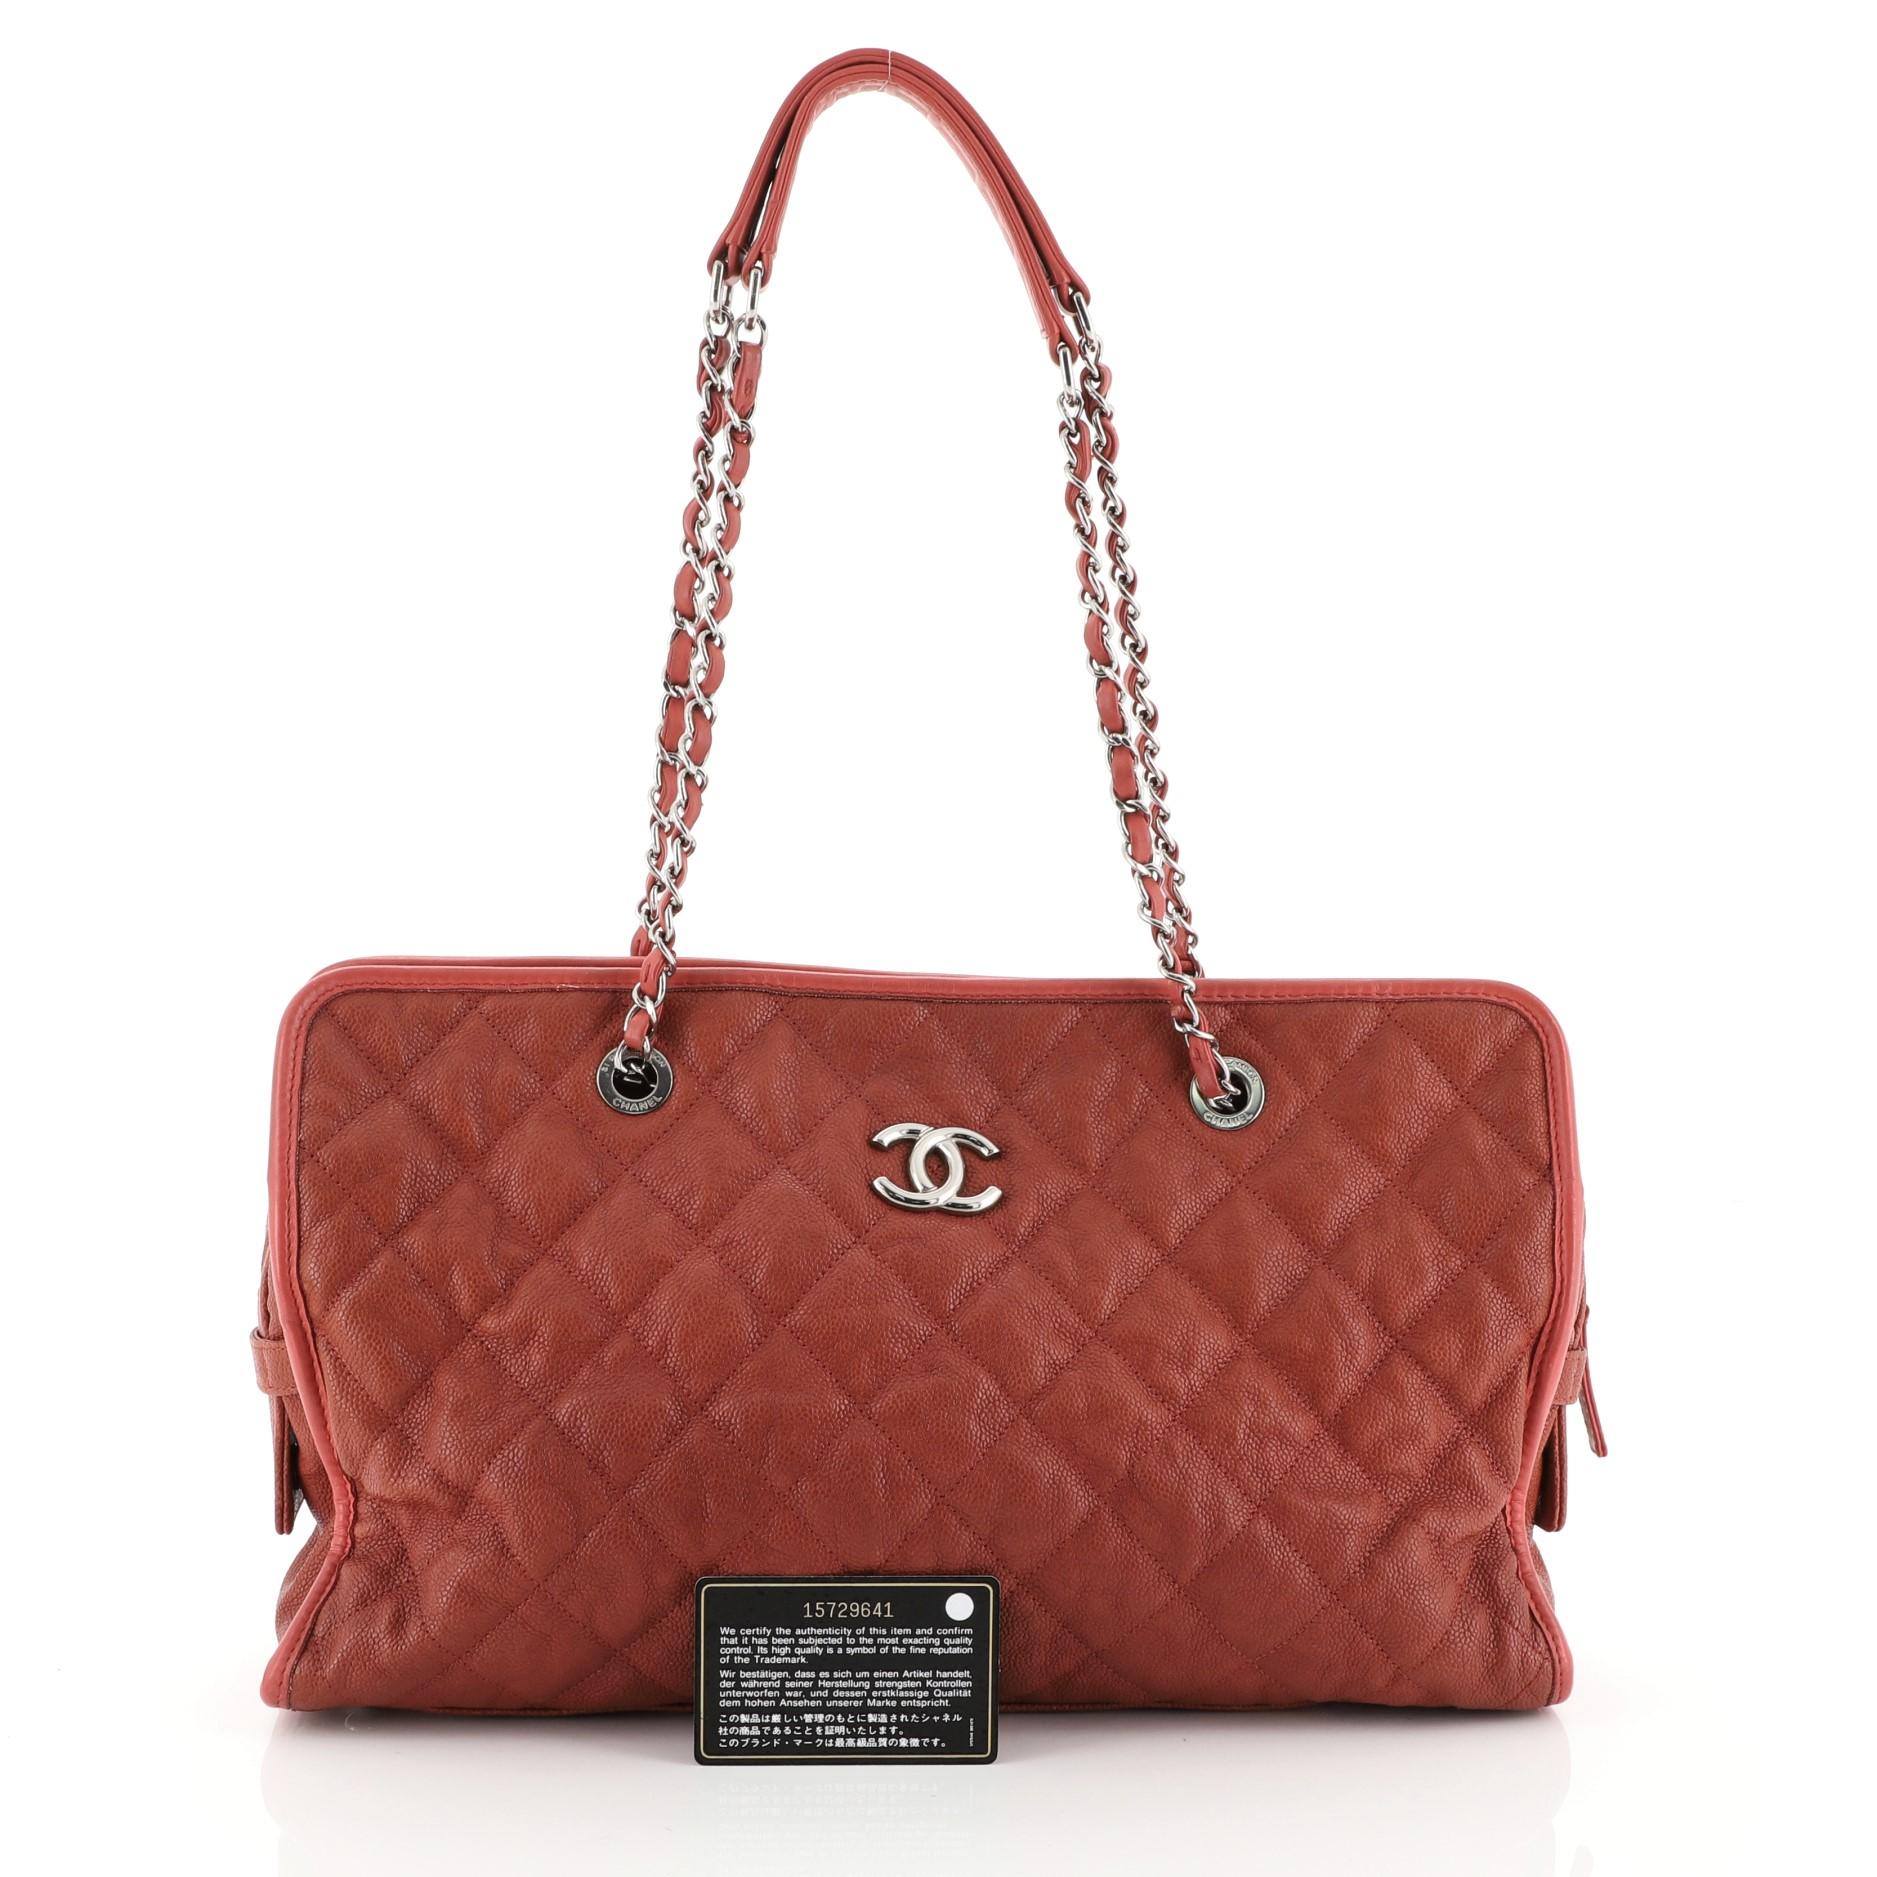 This Chanel French Riviera Tote Quilted Caviar Large, crafted in red quilted caviar leather, features woven-in leather chain link straps with leather pads and silver-tone hardware. Its zip closure opens to a red fabric interior with side zip pocket.